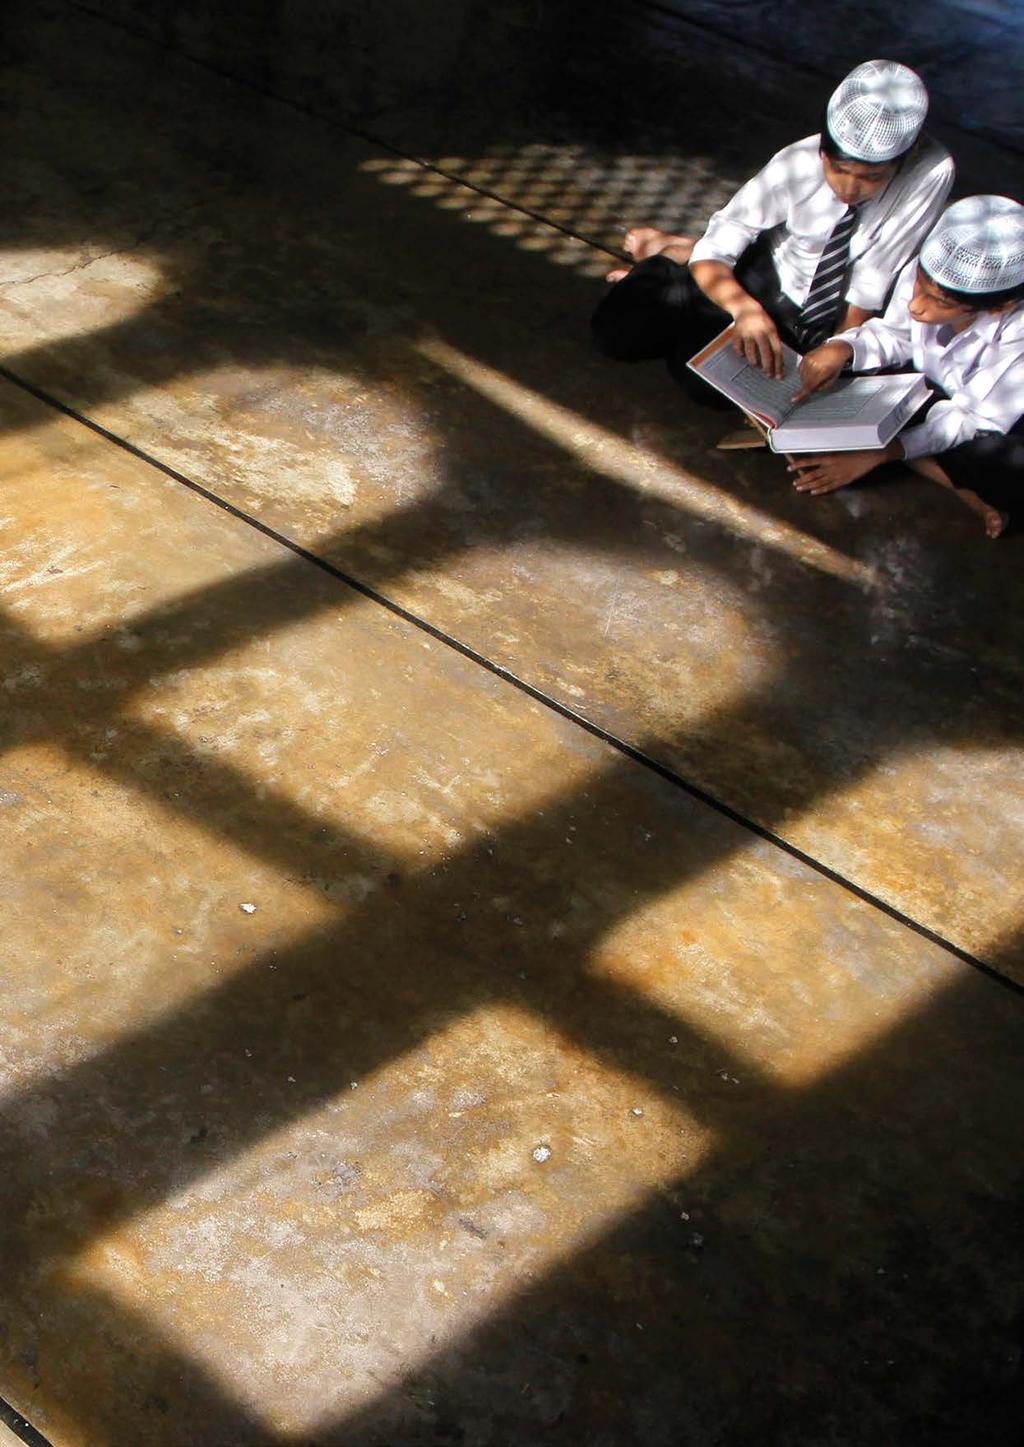 INTRODUCTION Muslim boys read Koran inside a mosque during the holy month of Ramadan in Kolkata